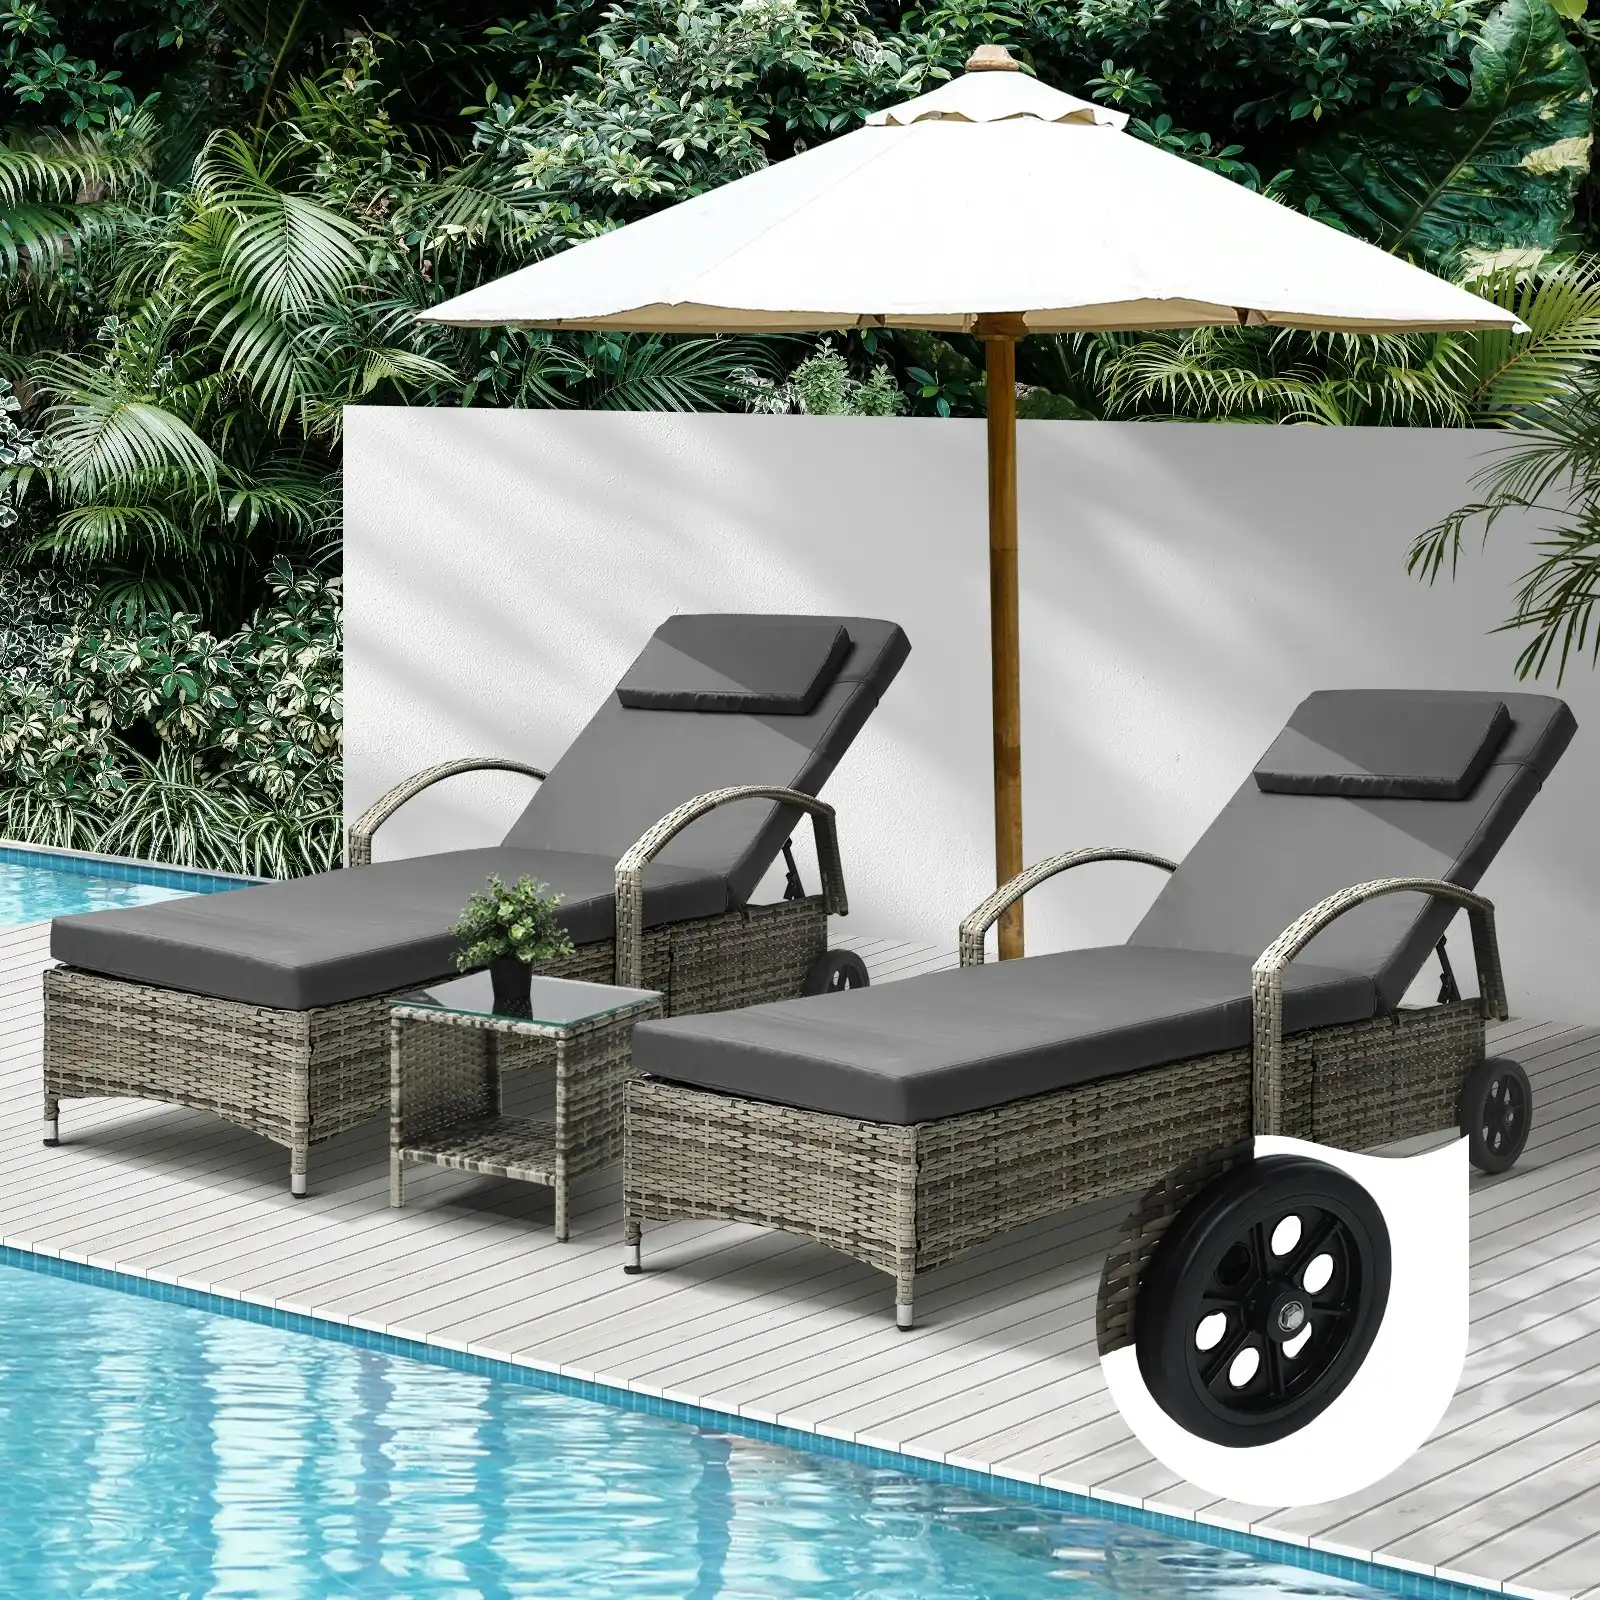 Livsip 2x Wheeled Sun Lounger Day Bed W/ Table Outdoor Setting Patio Furniture